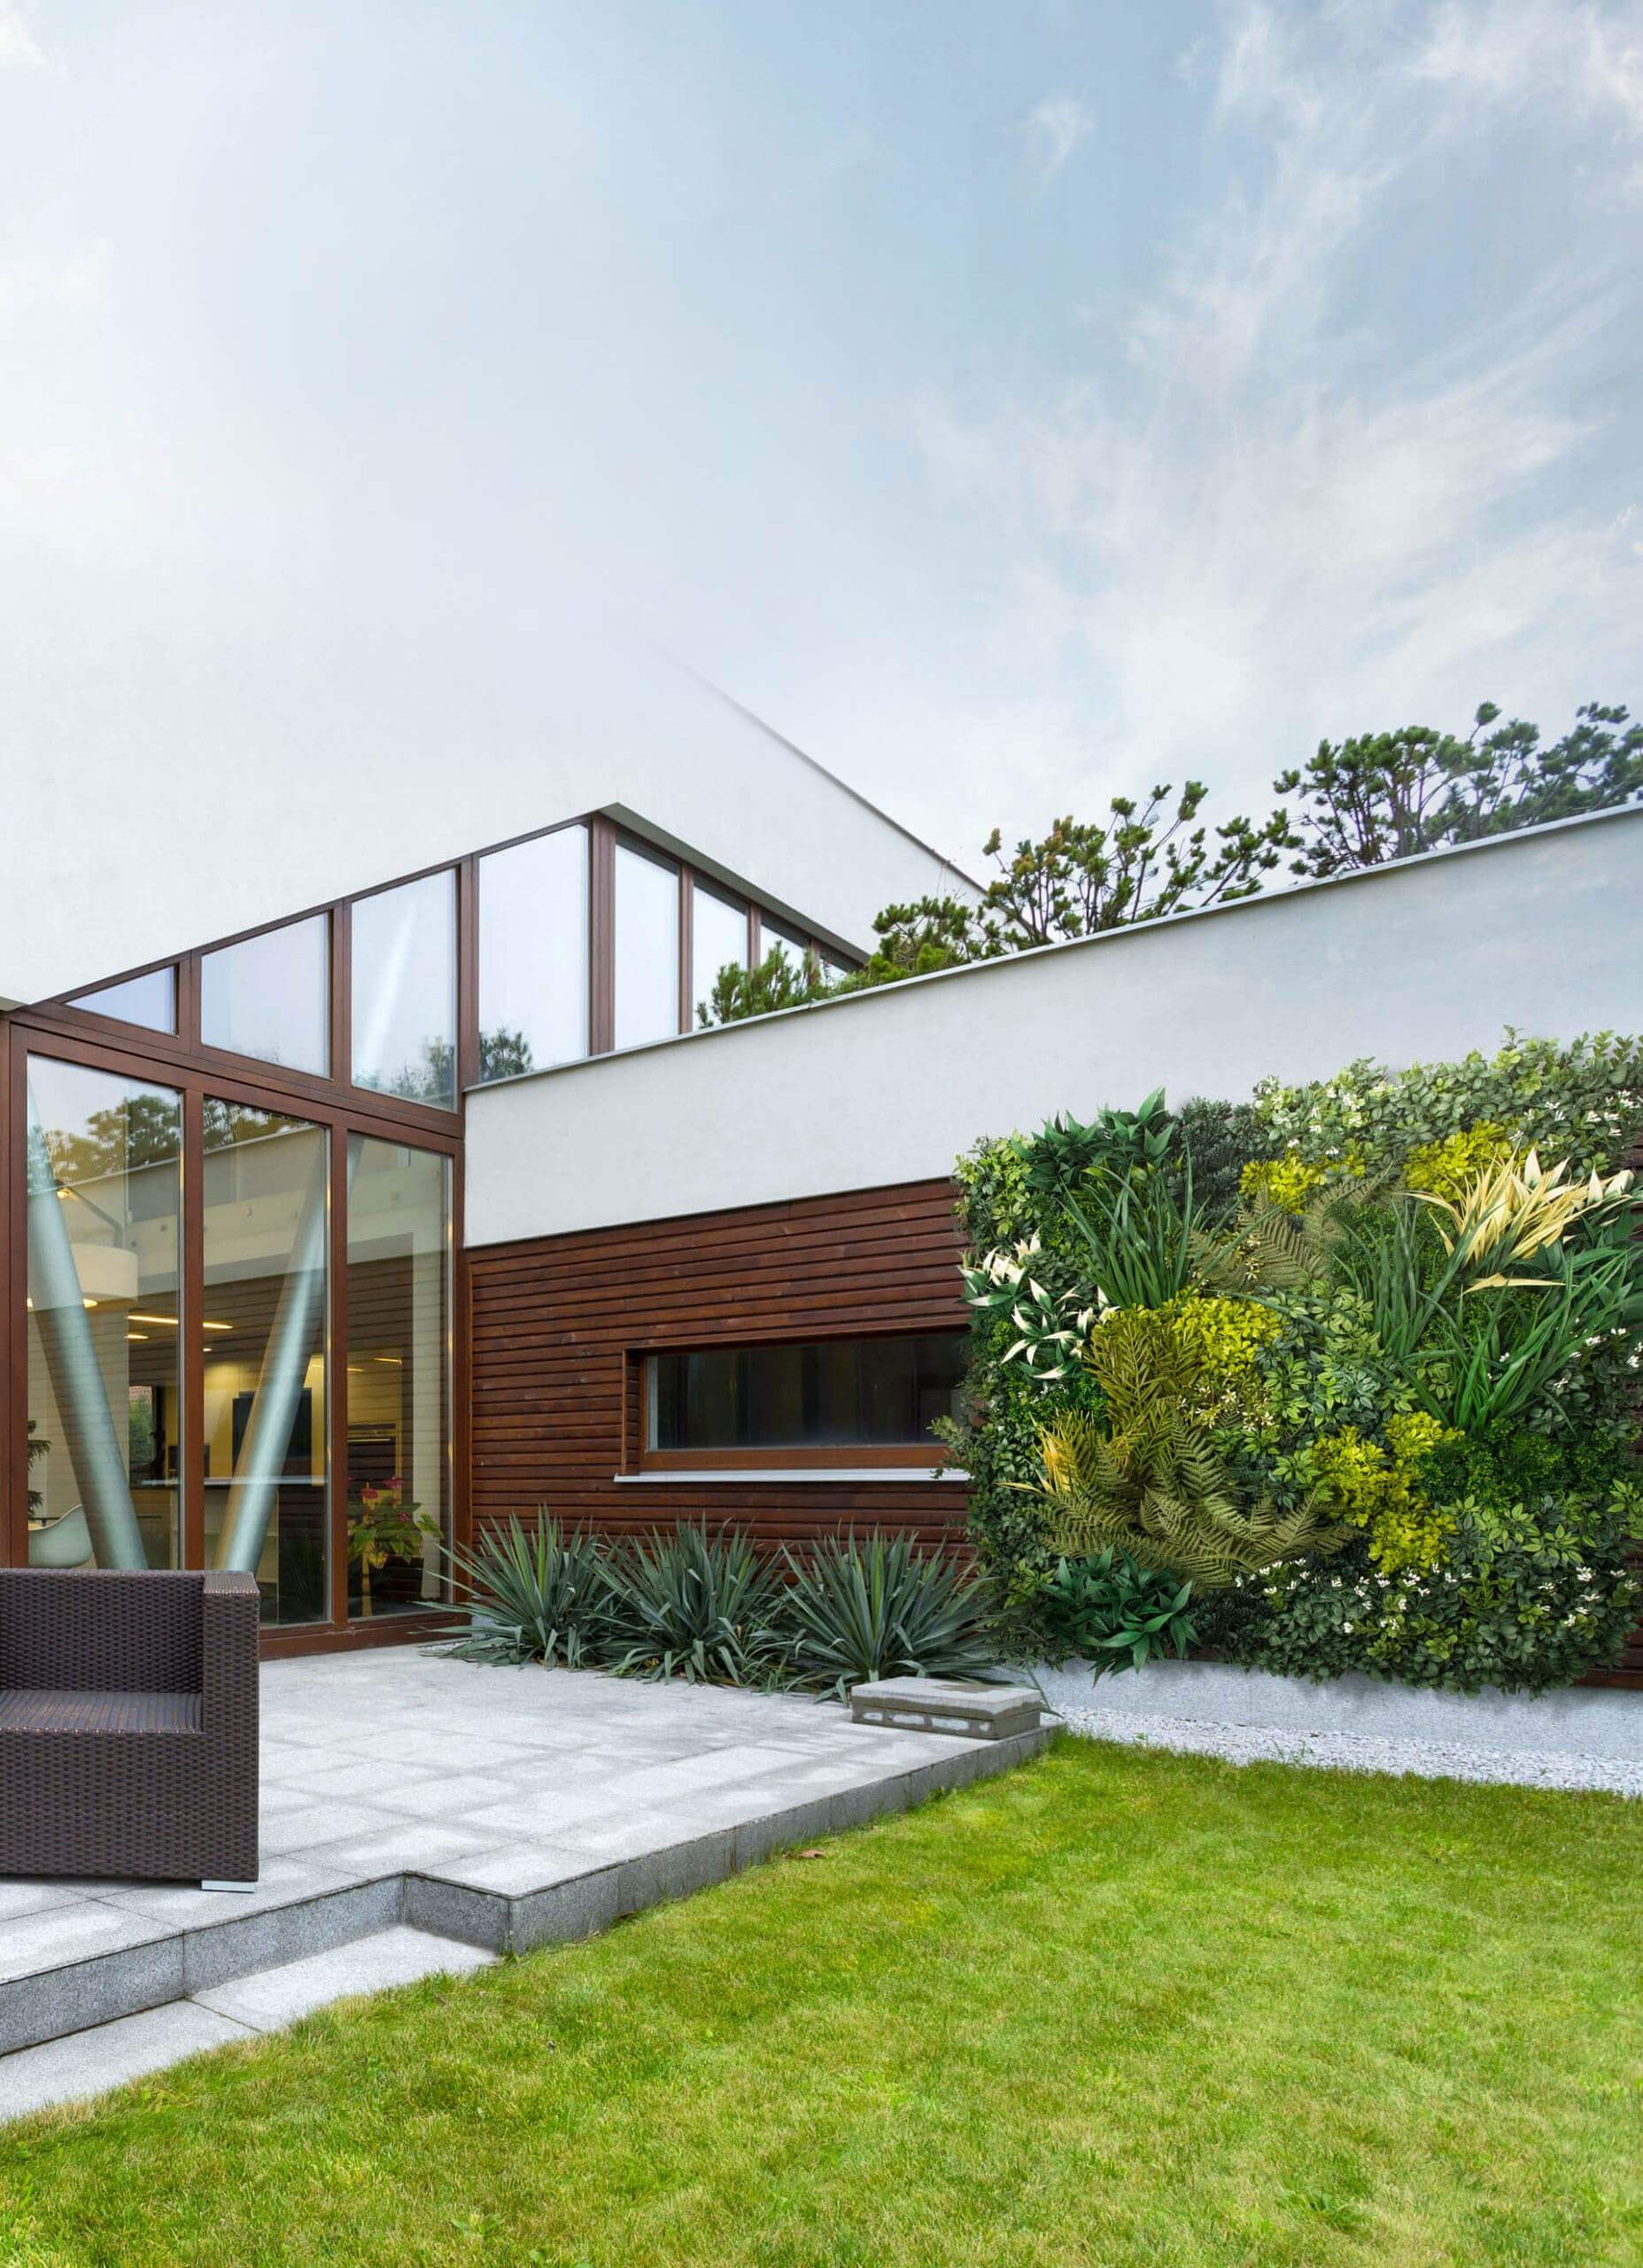 Beautiful exterior of a modern home with a plant wall facing a grass and cement area